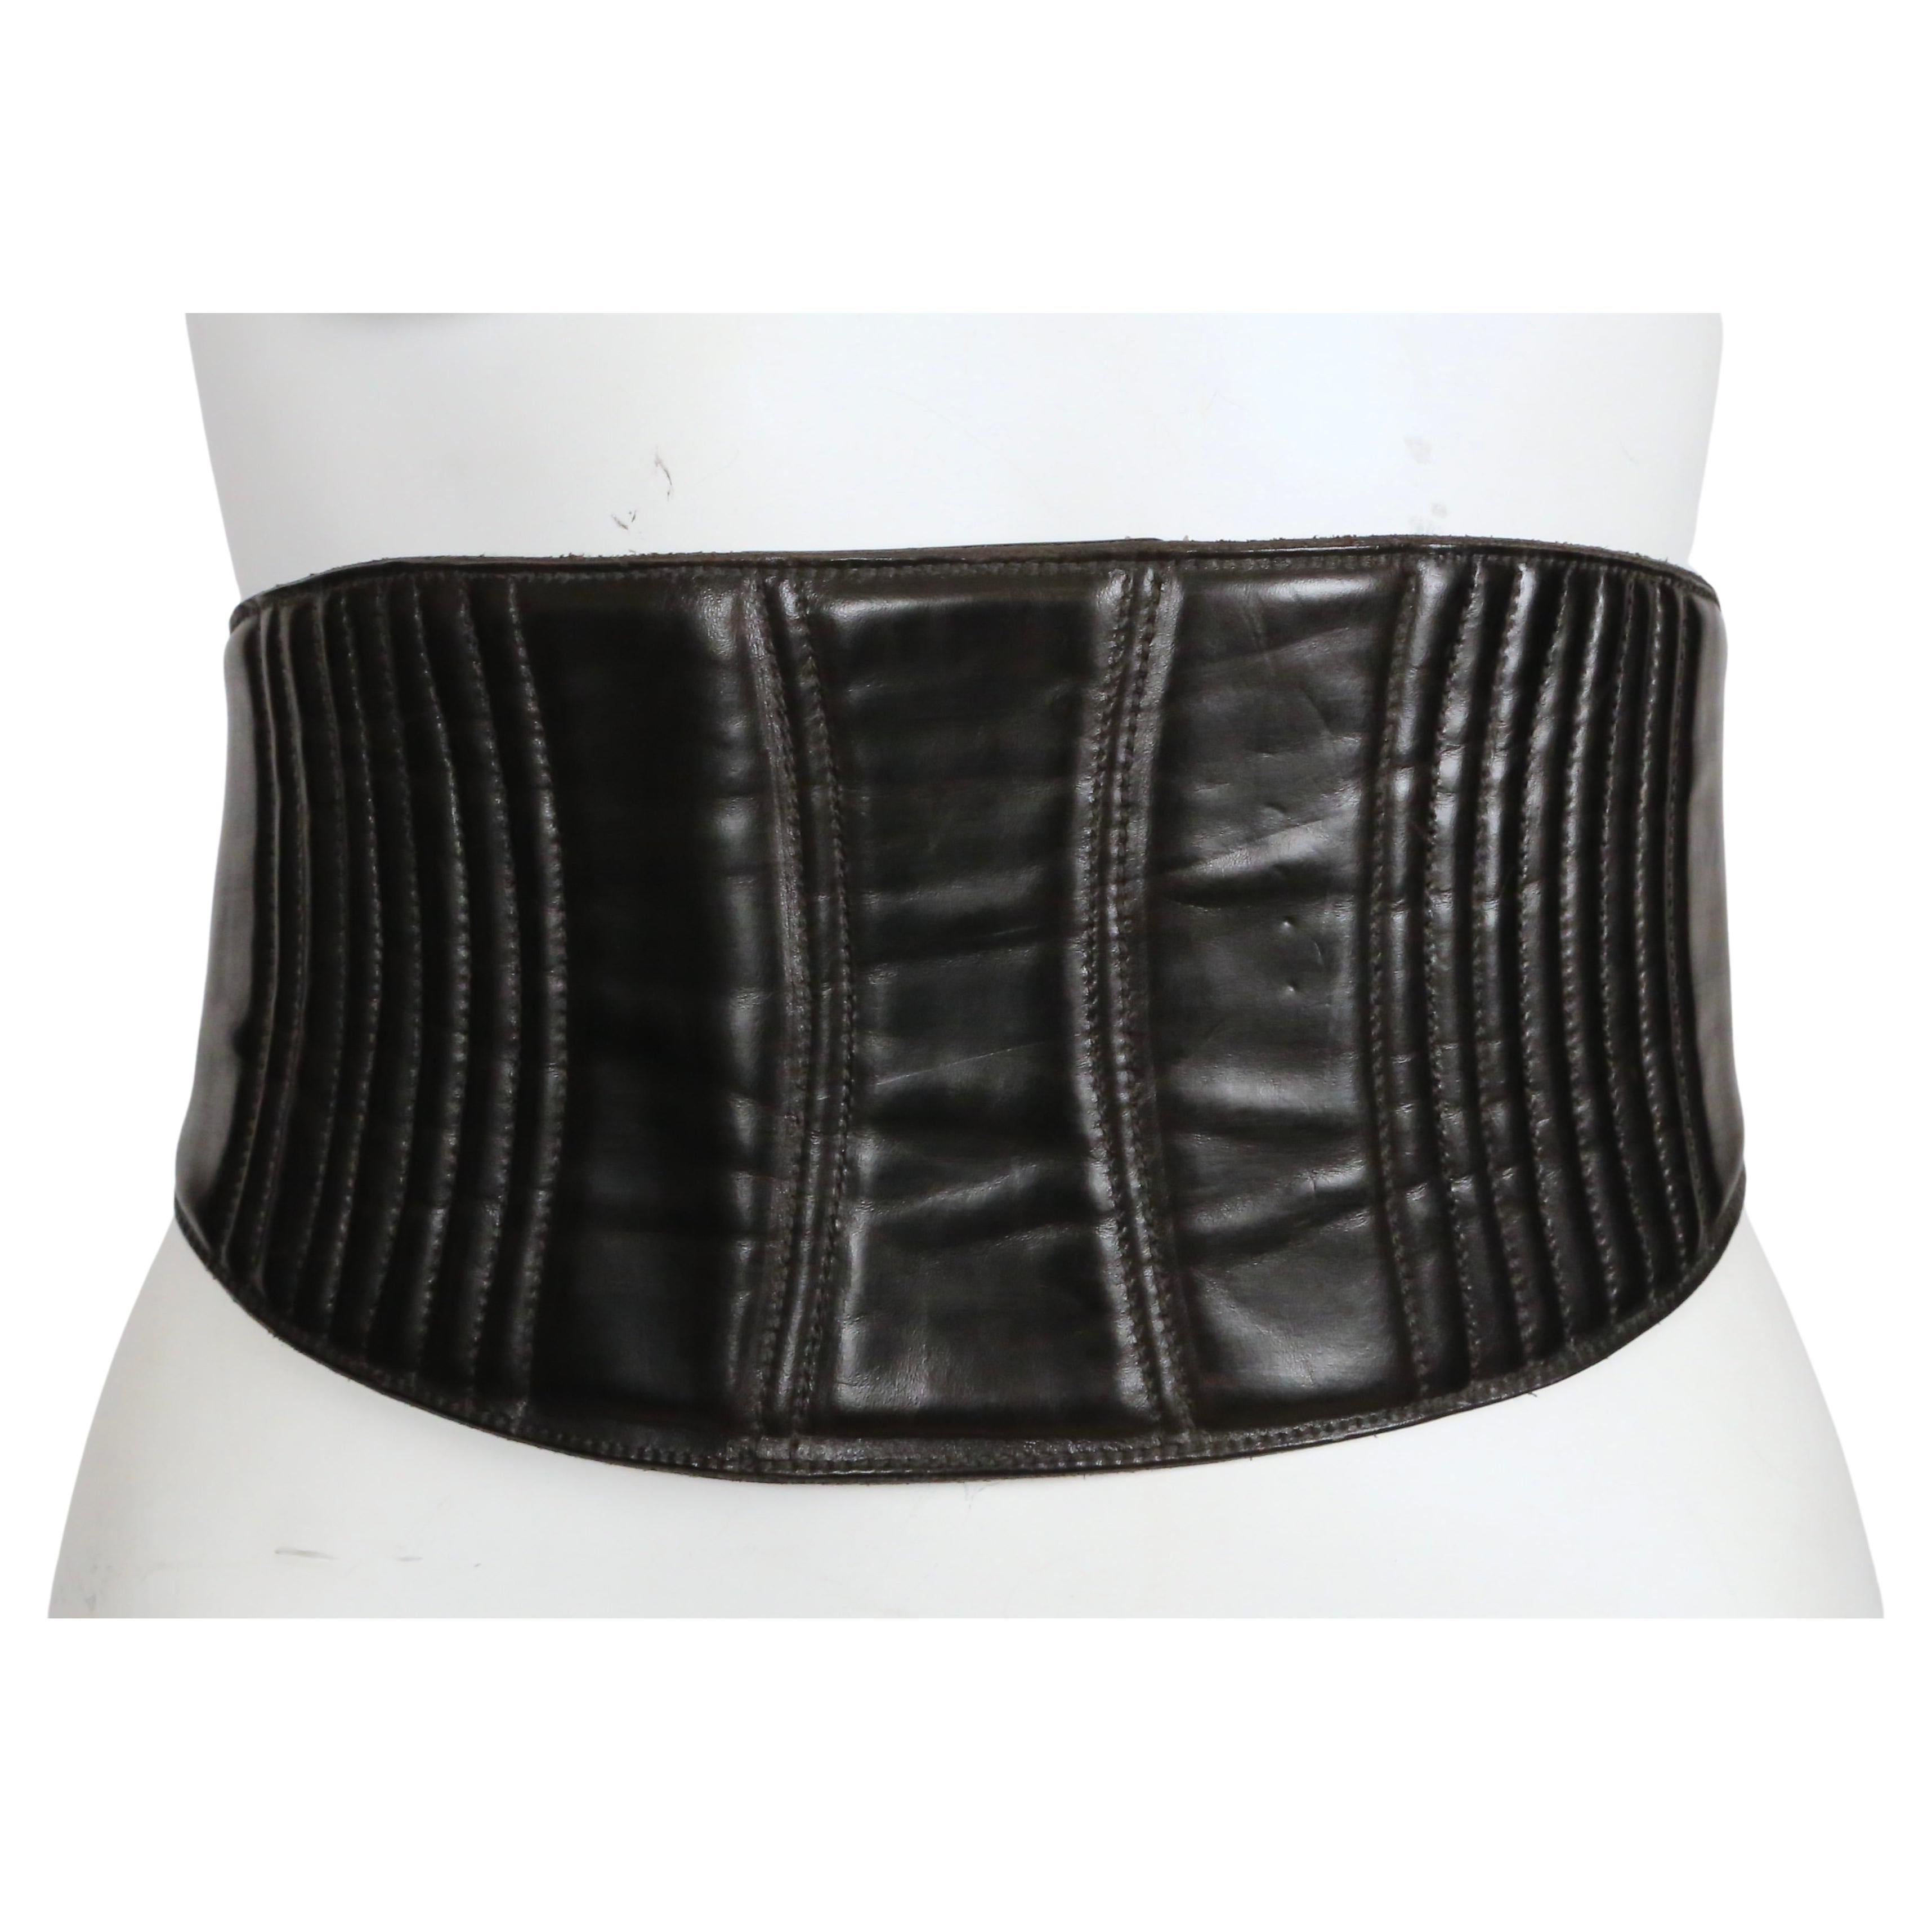 Very rare, black leather belt with lace up corset detailing designed by Dries Van Noten dating to the late 1990's. Size 70. Belt measures approximately: just under 5.5